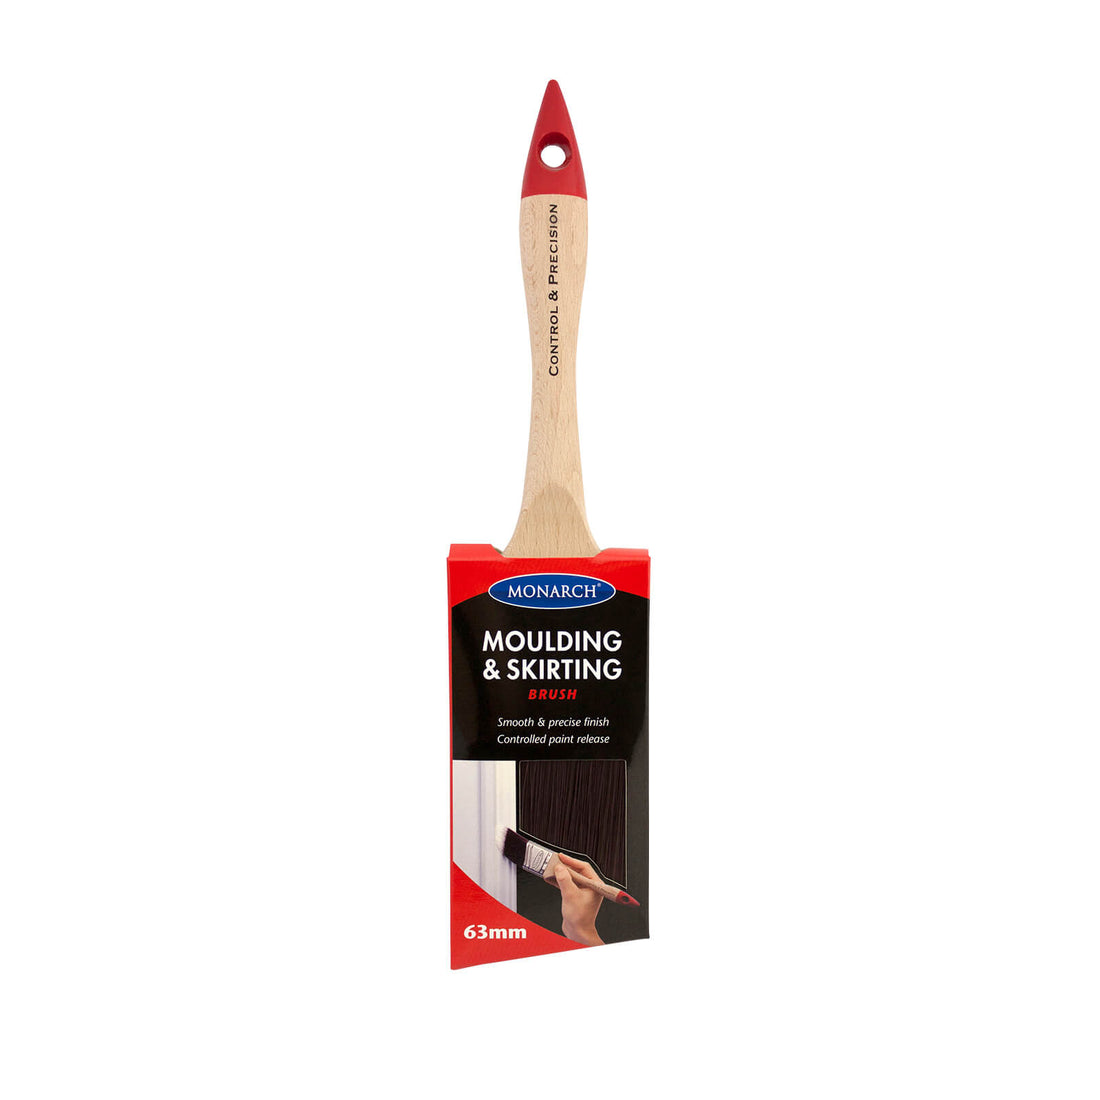 MONARCH Moulding and Skirting Brush